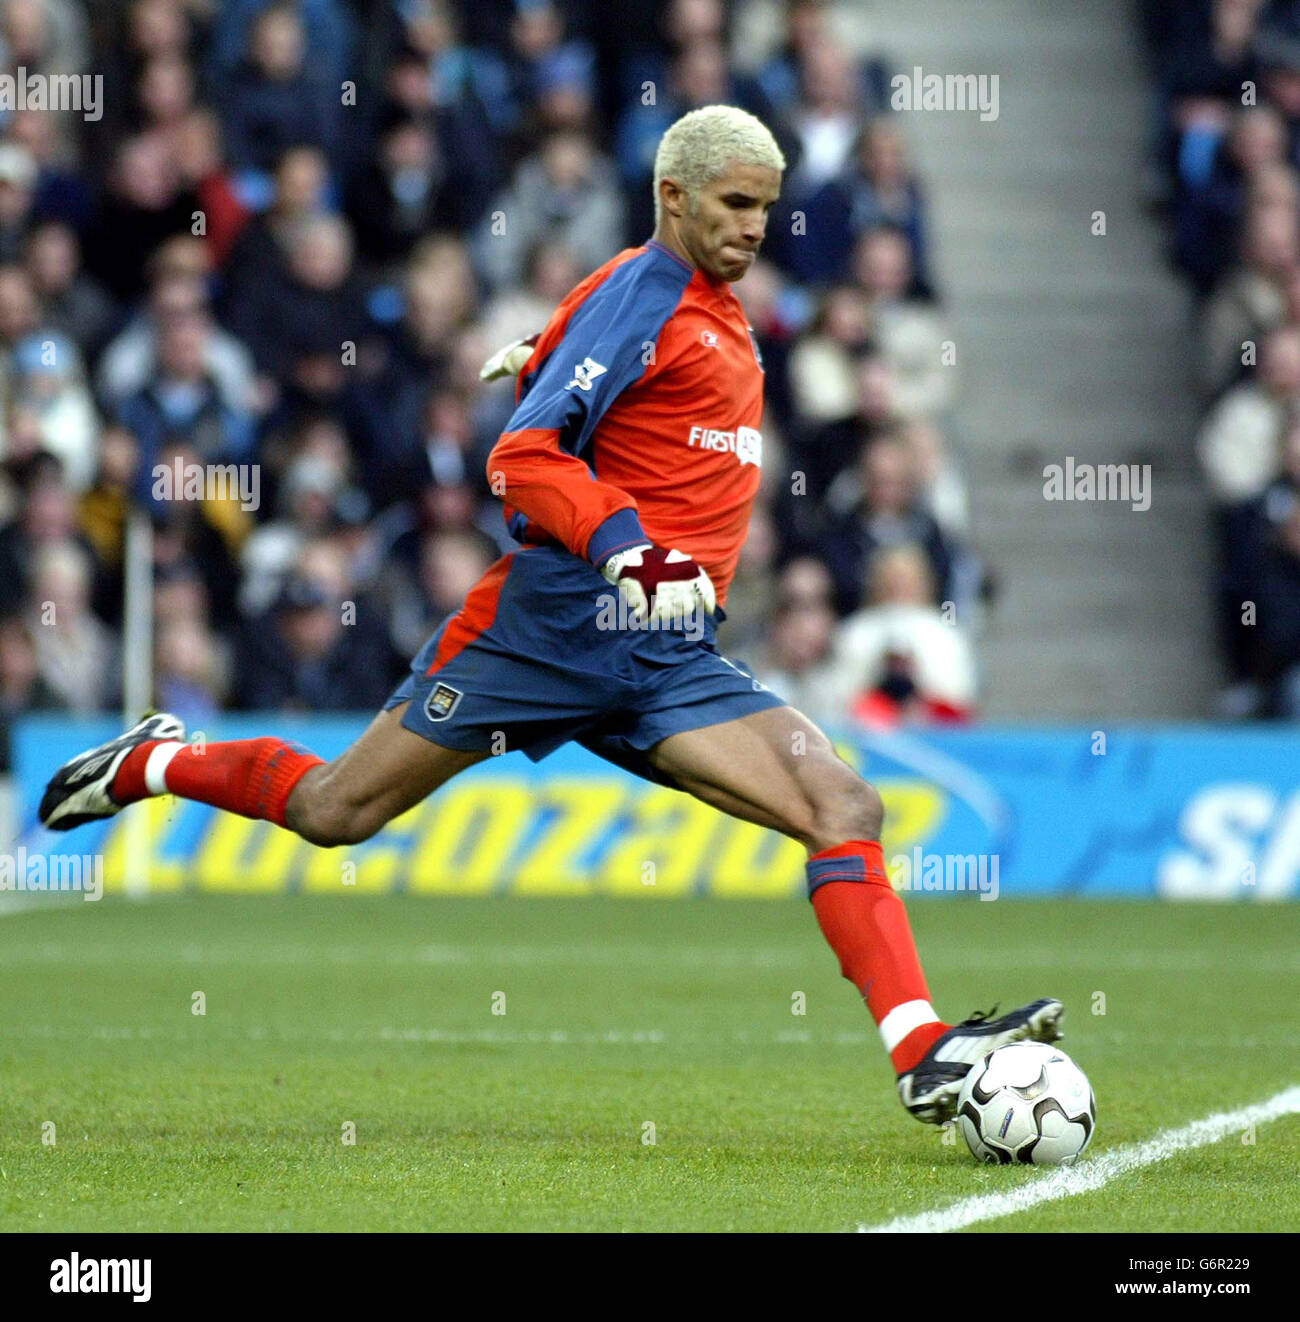 David James, Manchester City's new golakeeper during the FA Barclaycard Premiership gme between Manchester City and Blackburn Rovers at The City of Manchester Stadium. Stock Photo